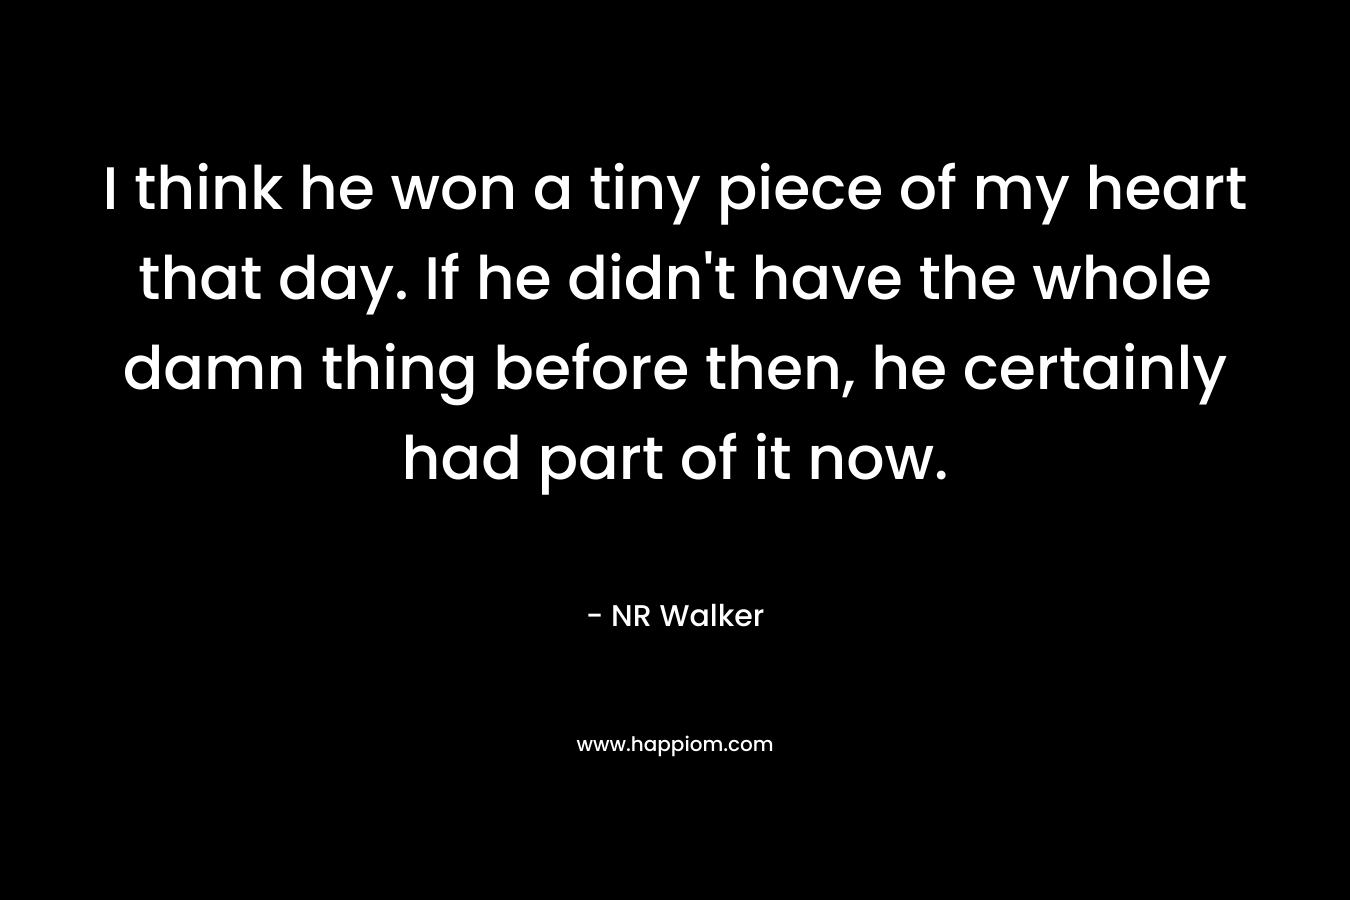 I think he won a tiny piece of my heart that day. If he didn’t have the whole damn thing before then, he certainly had part of it now. – NR Walker